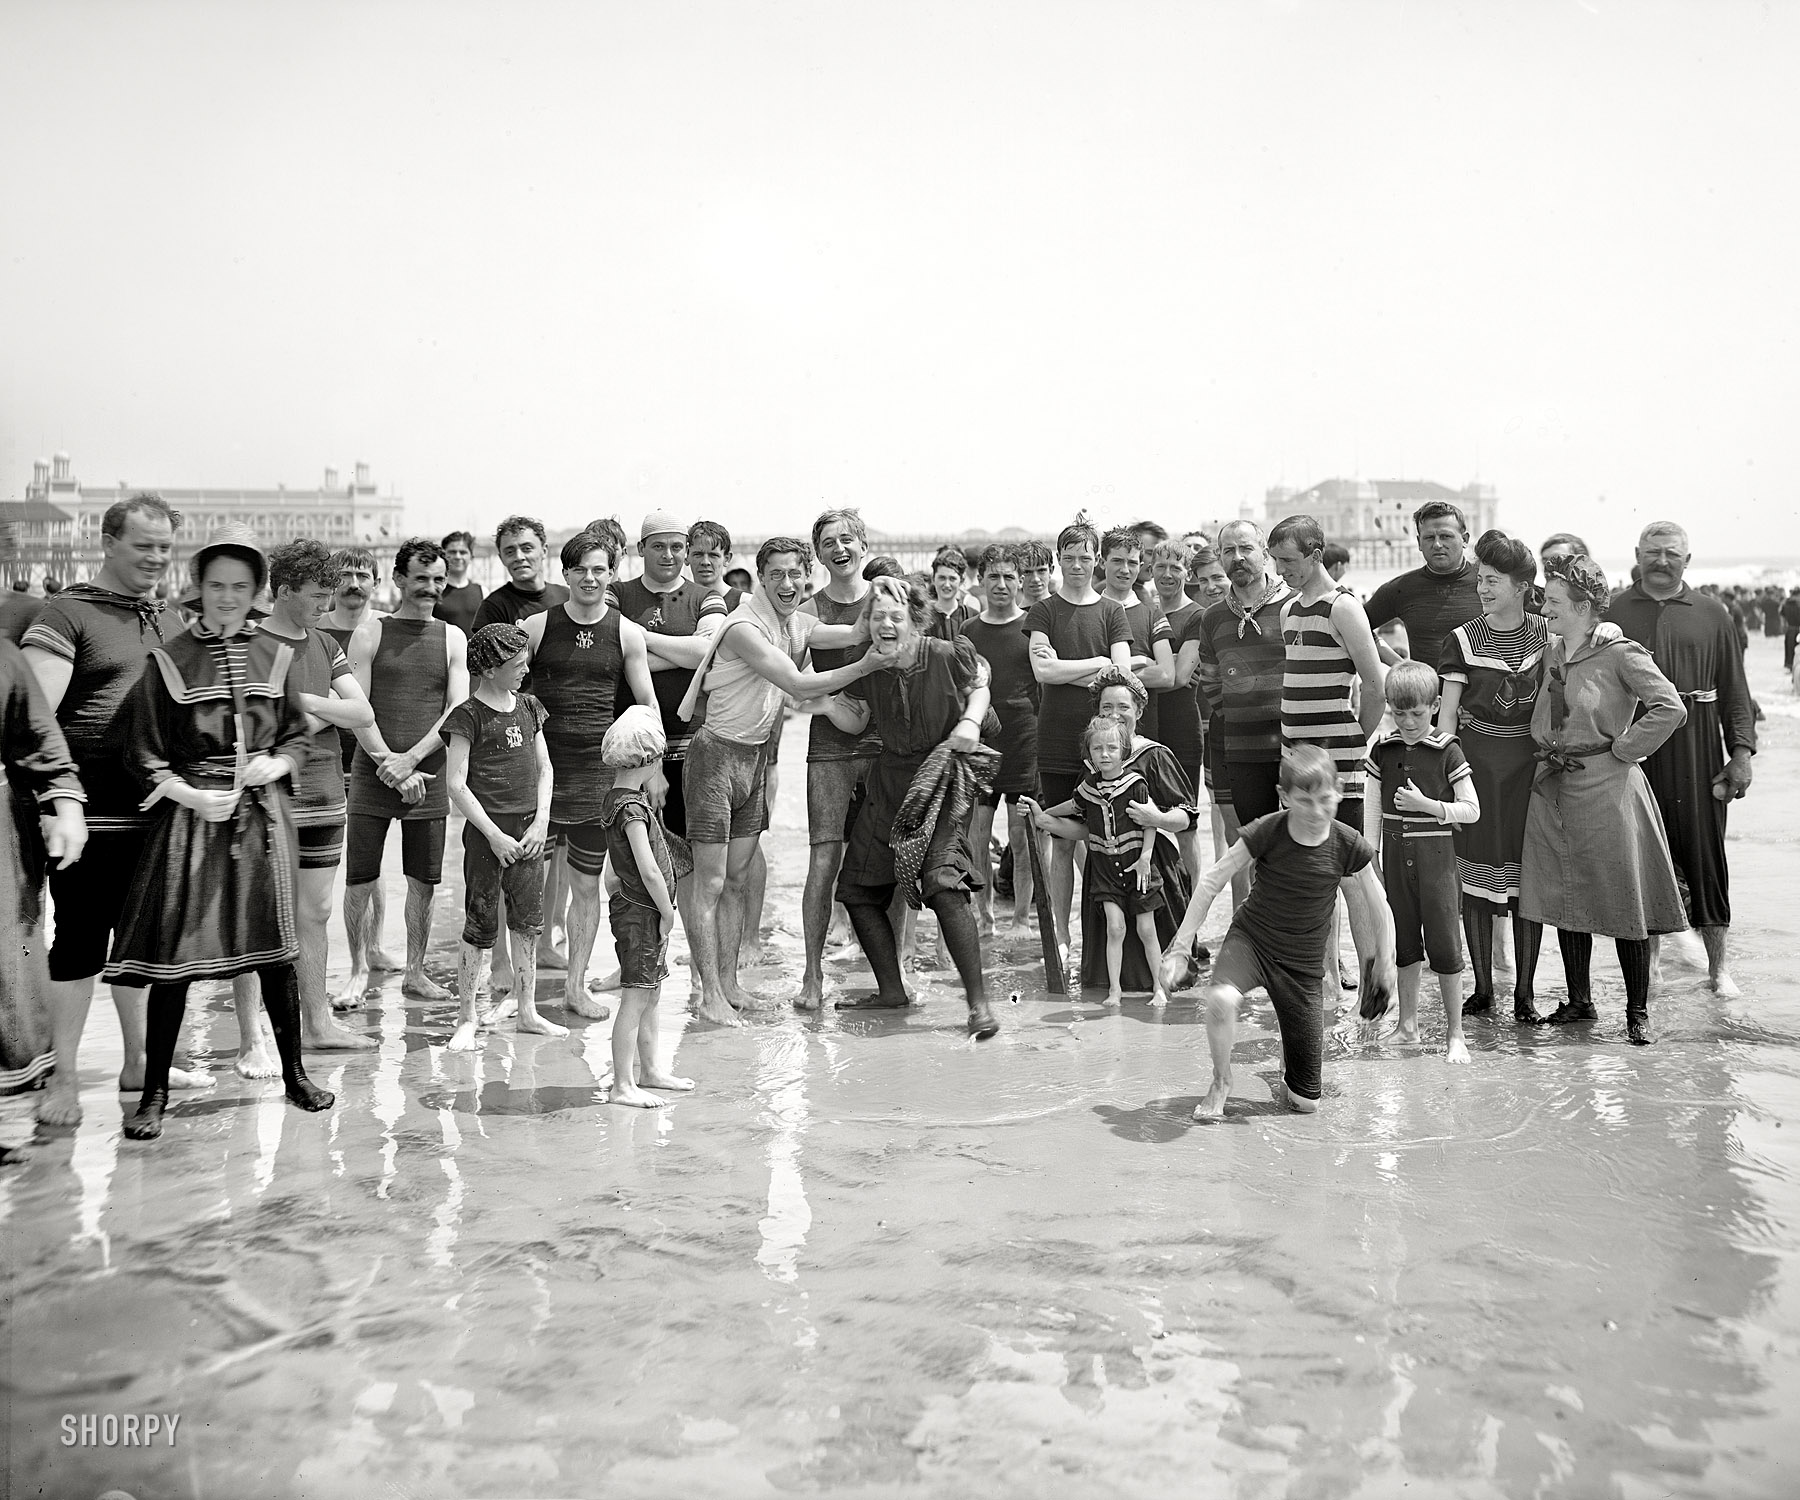 The Jersey Shore circa 1905. "On the beach, Atlantic City." 8x10 inch dry plate glass negative, Detroit Publishing Company. View full size.